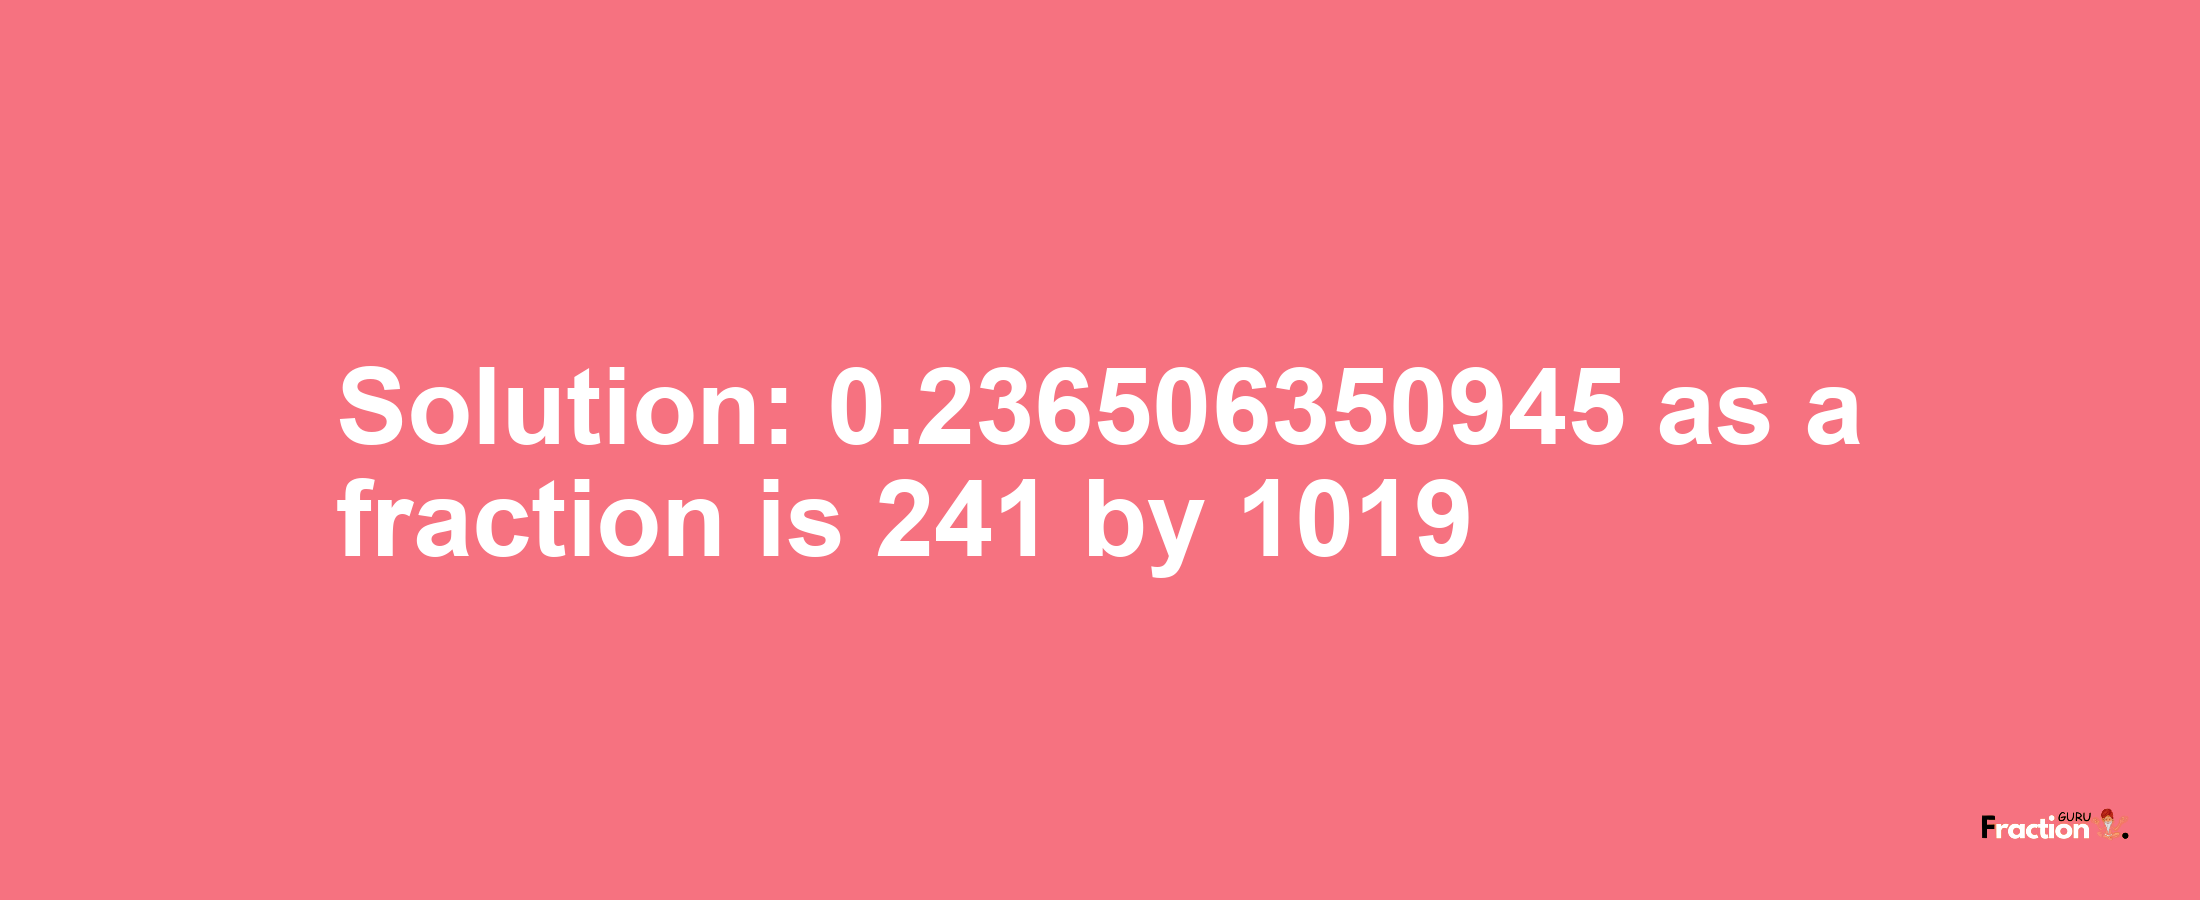 Solution:0.236506350945 as a fraction is 241/1019